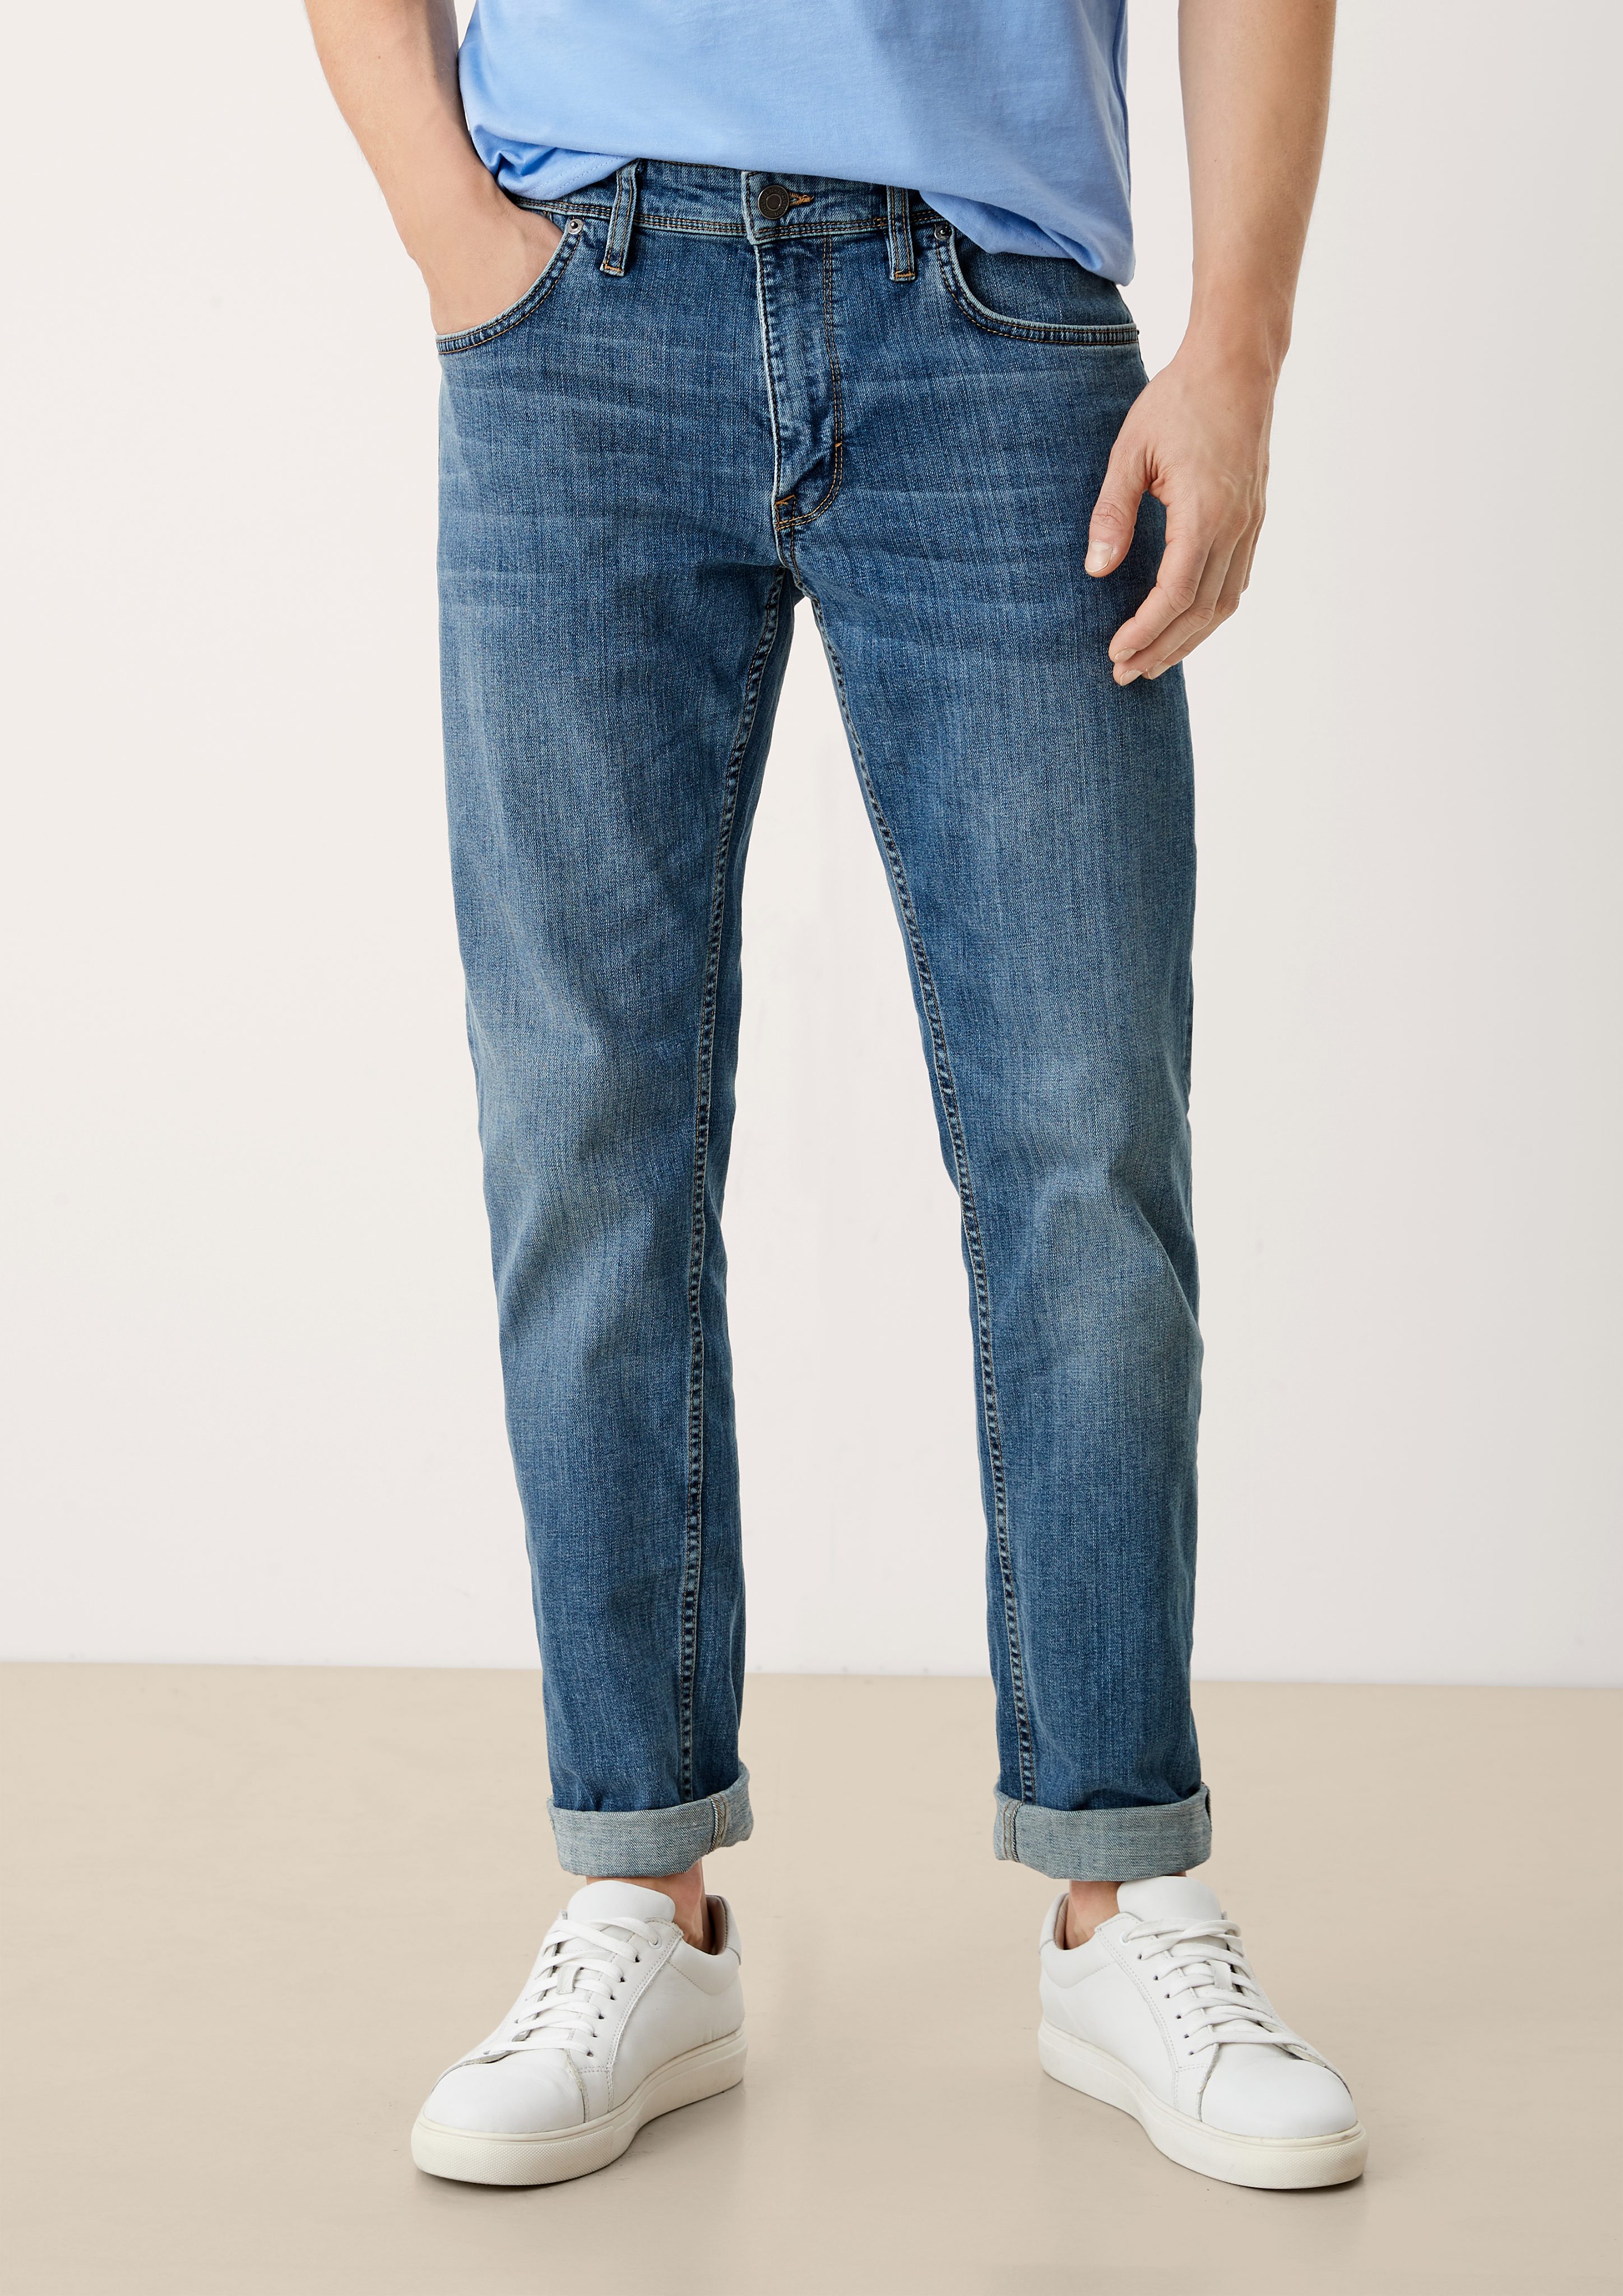 Straight Regular Waschung Fit York Mid / Jeans / / Stoffhose blue s.Oliver Rise Leg